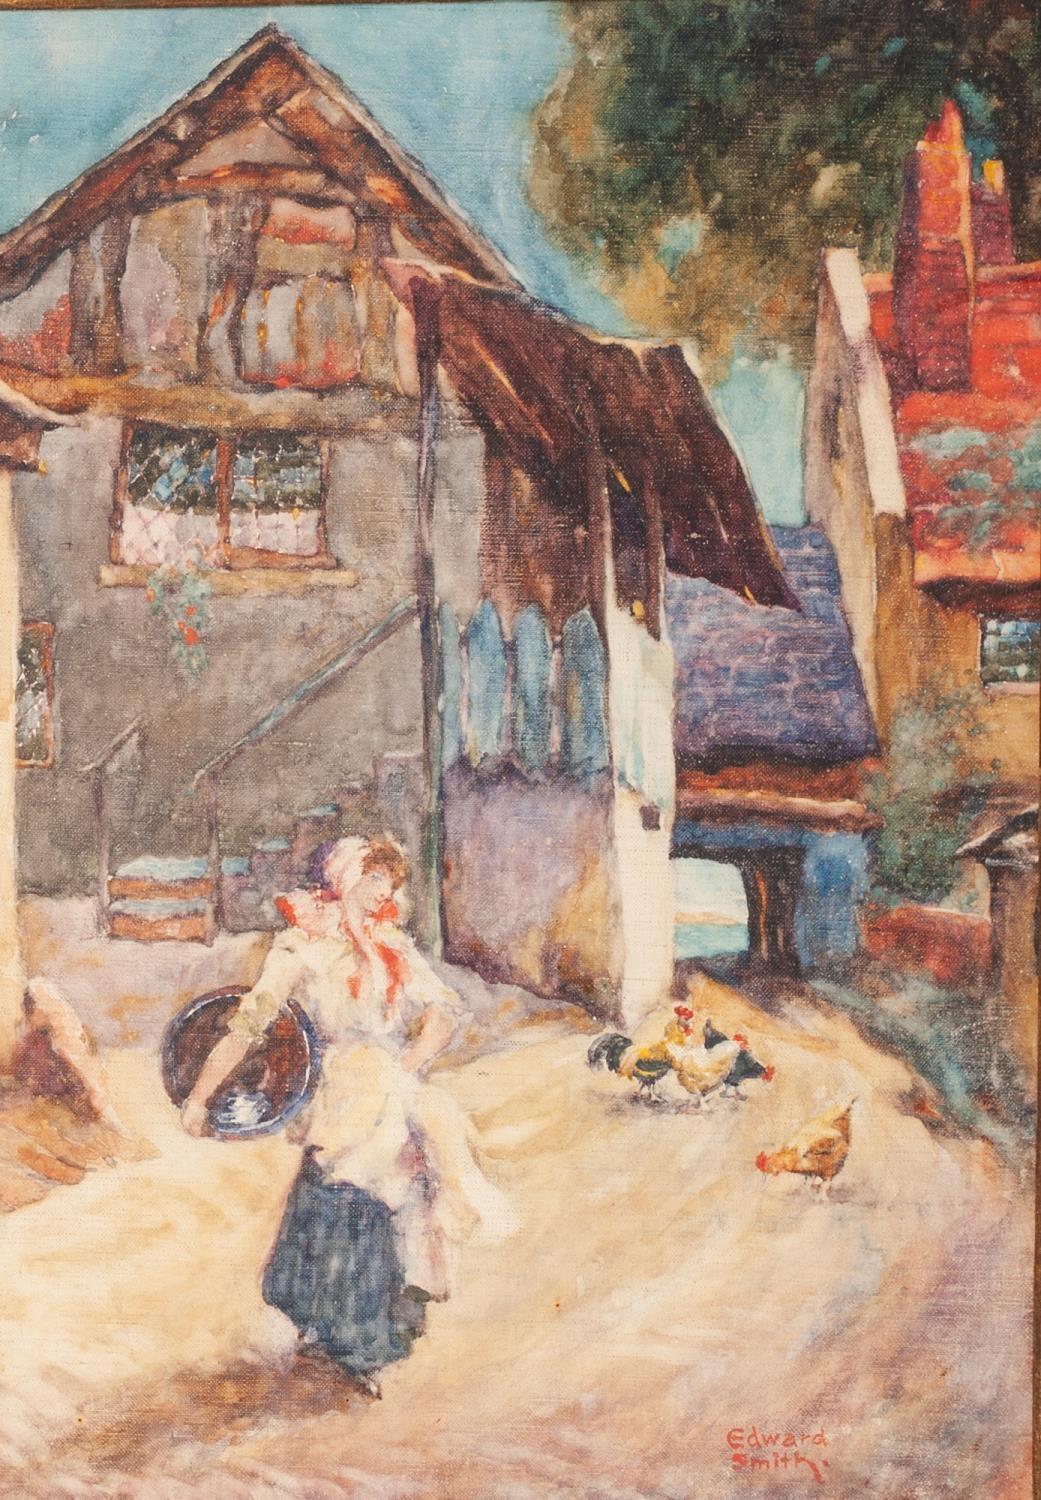 EDWARD SMITH (fl.1904-23) WATERCOLOURS, A PAIR Rustic scenes with respectively a mother and child